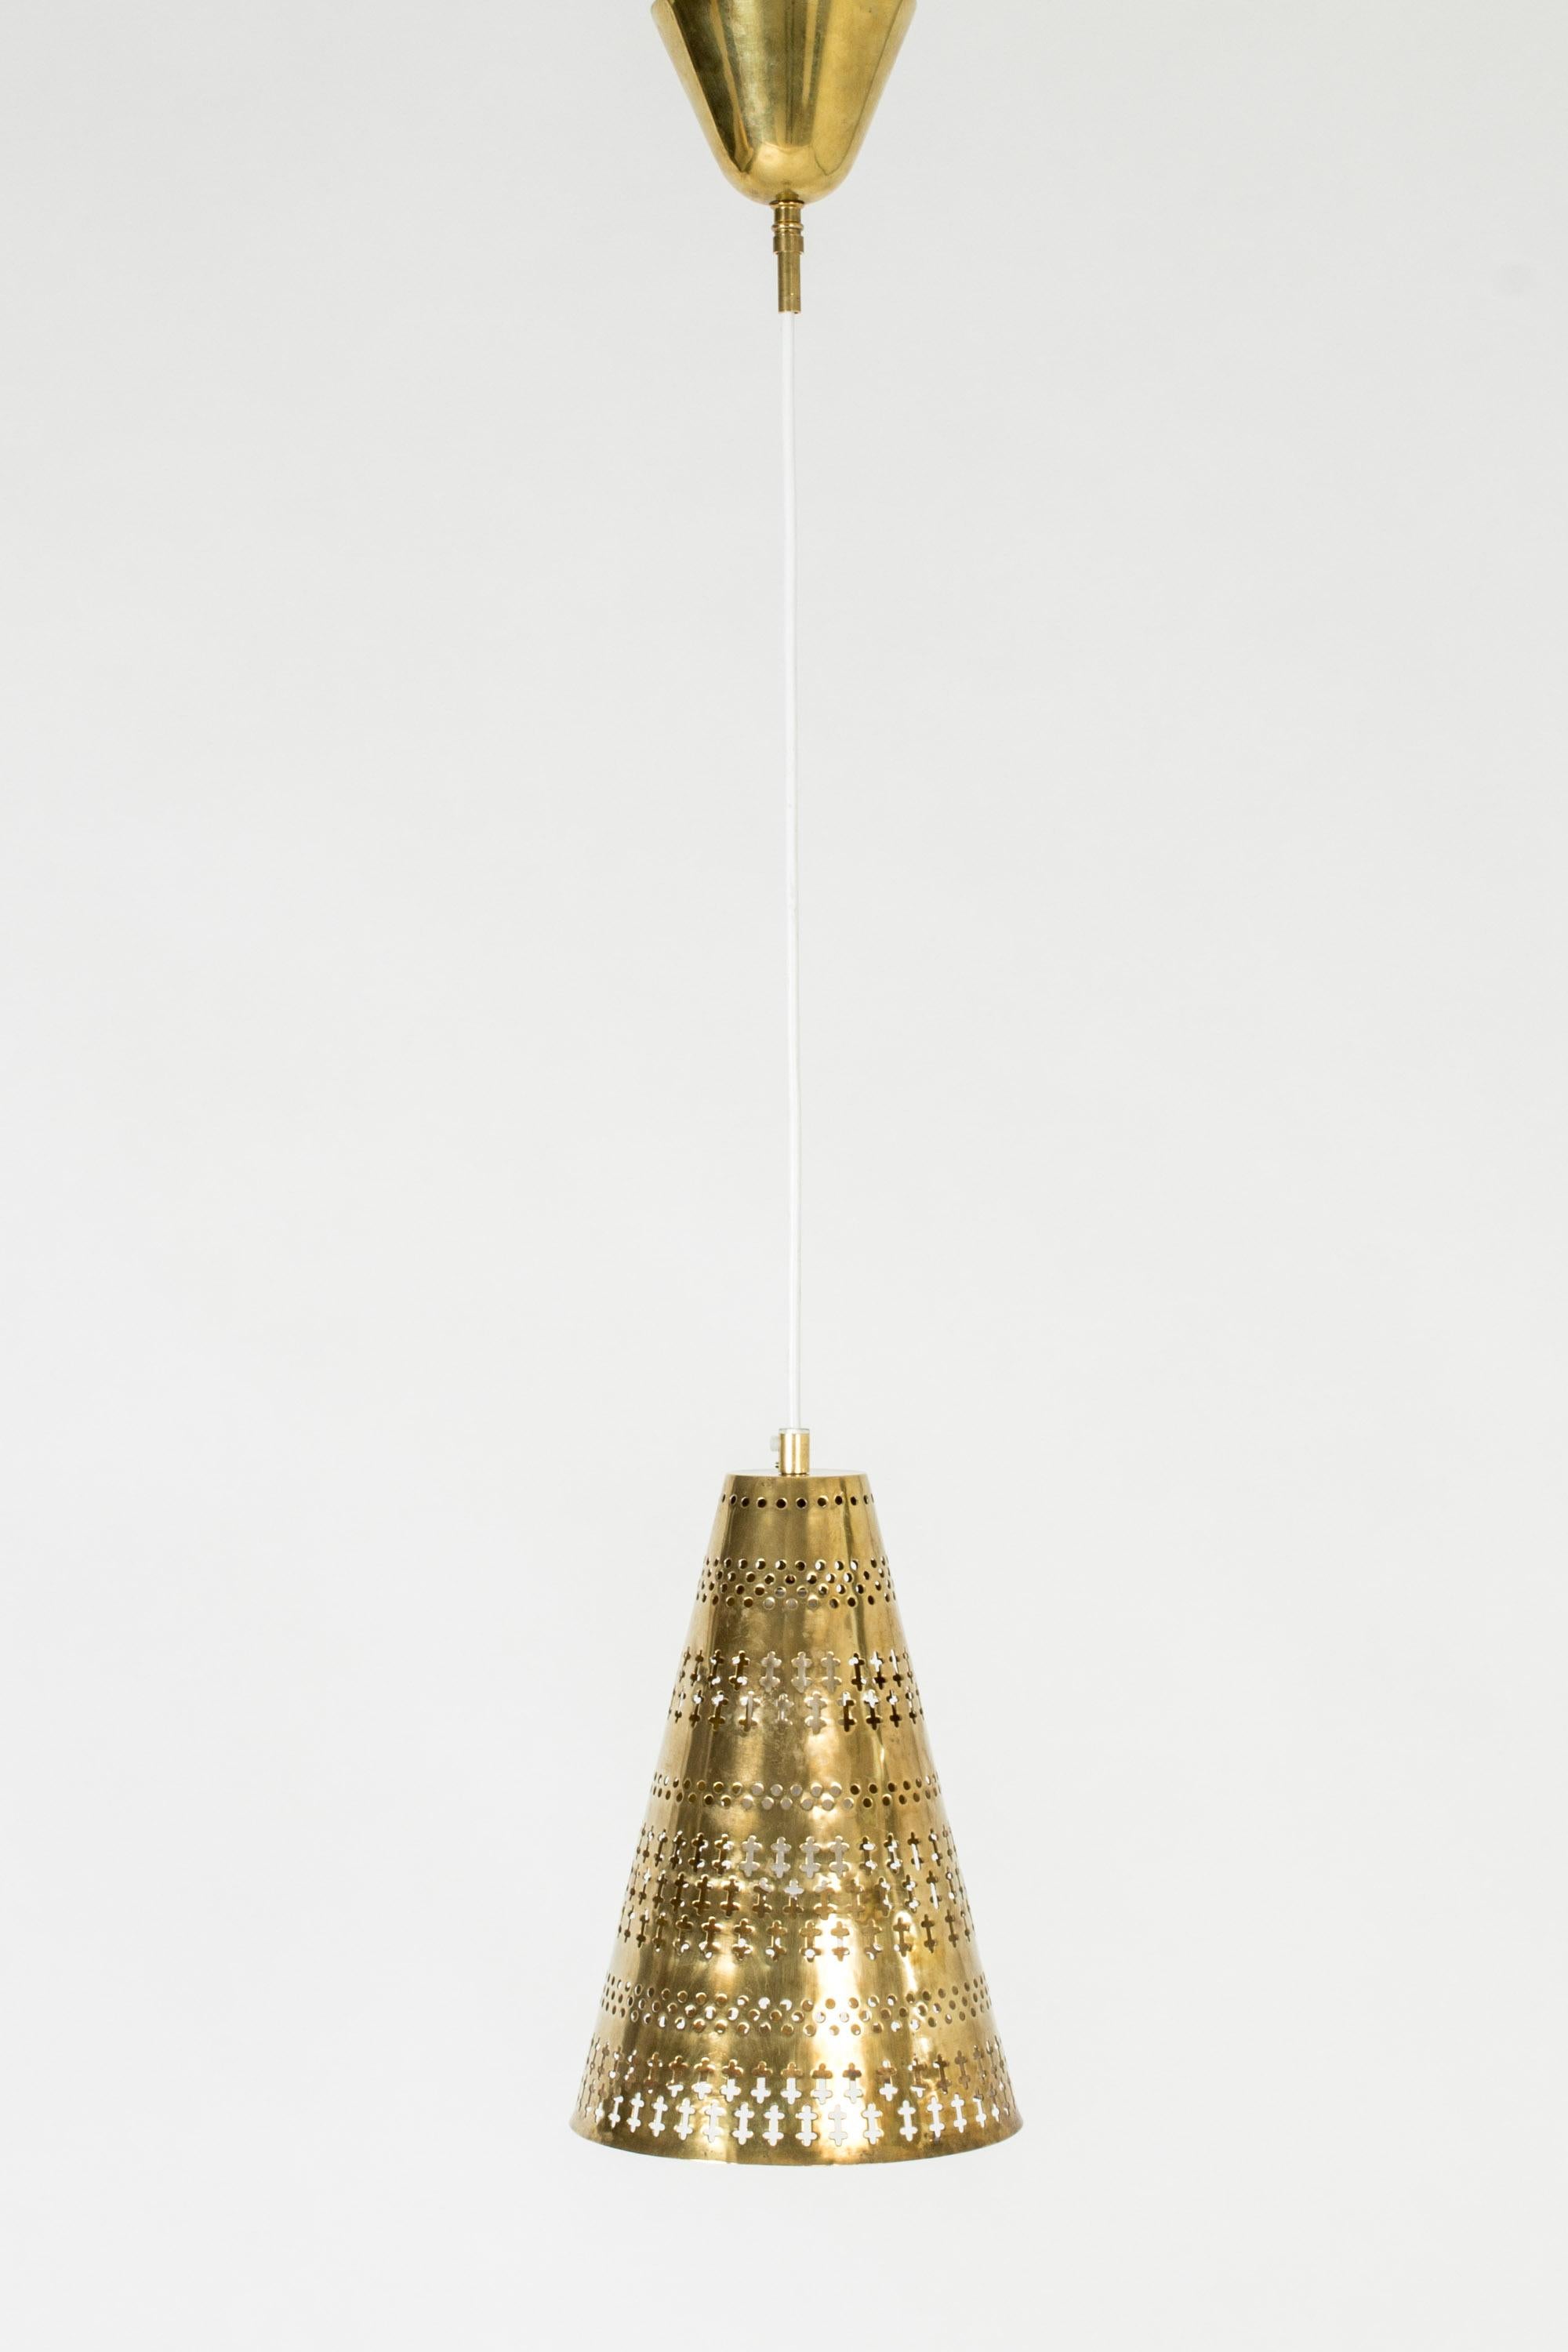 Lovley brass ceiling lamp by Hans Bergström, in a conical form. Perforated with a beautiful pattern of holes and graphic shapes, making it glow like a piece of art in the dark.

Hans Bergström was the owner and creative director of the lighting